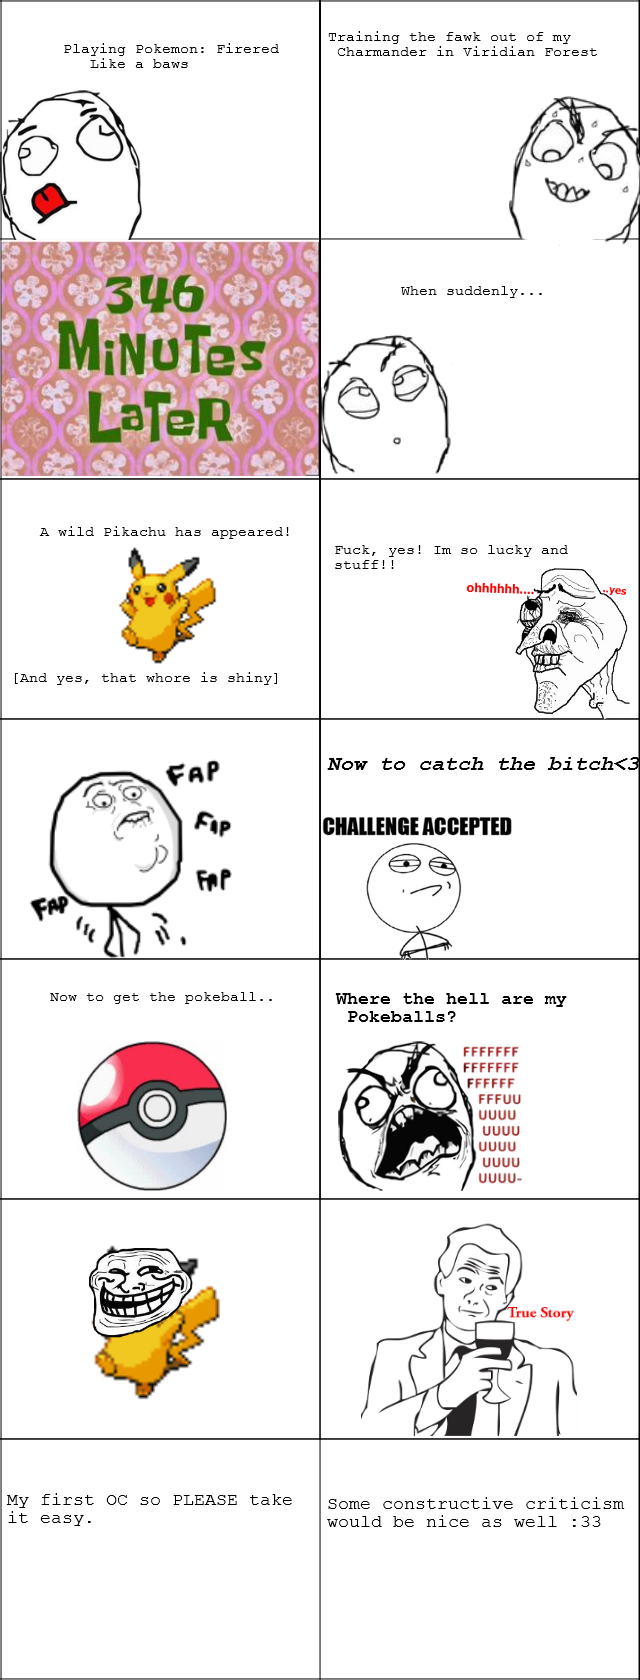 Trolld by pikachu... If youve had this happen to you you would understand my rage... Training the fawk cut of my Playing m: : a: Firered Char: ma: in ?eridian F